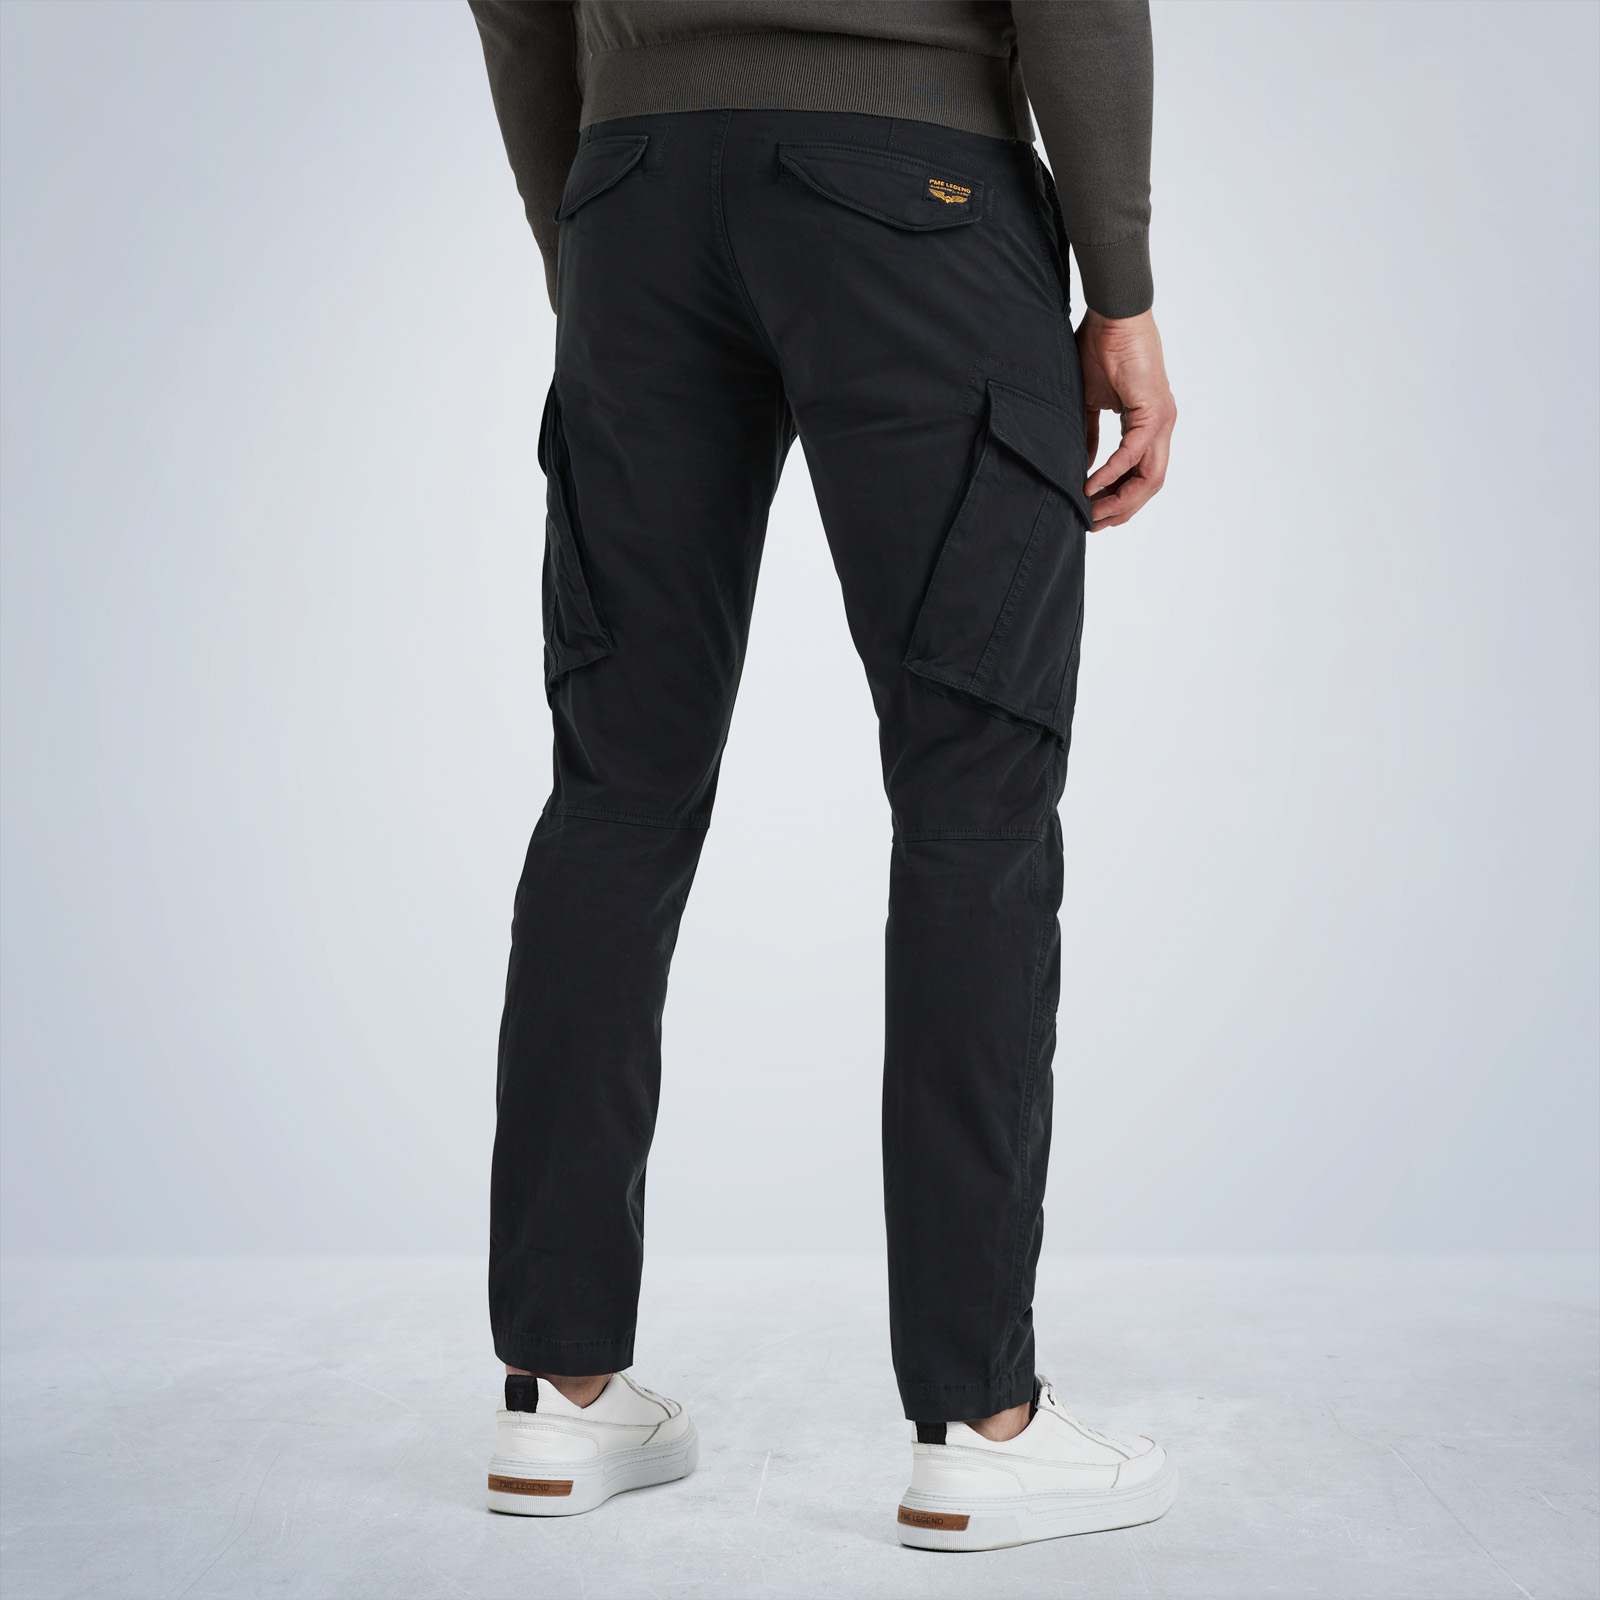 returns tapered shipping and pants Free LEGEND | | Nordrop cargo fit PME